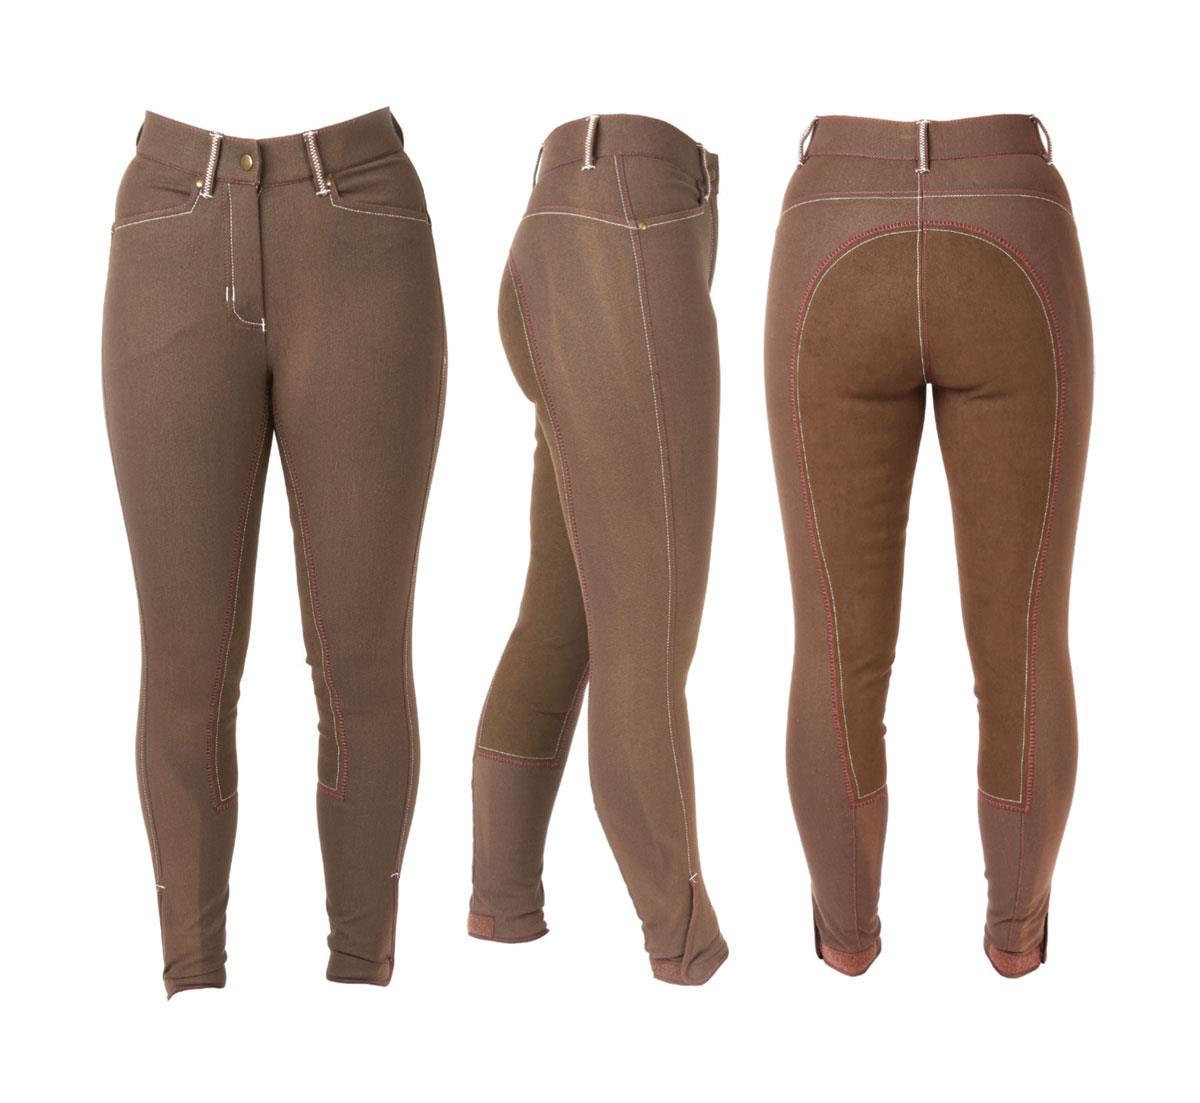 HyPERFORMANCE Denim Look with Leather Seat Ladies Breeches - Just Horse Riders